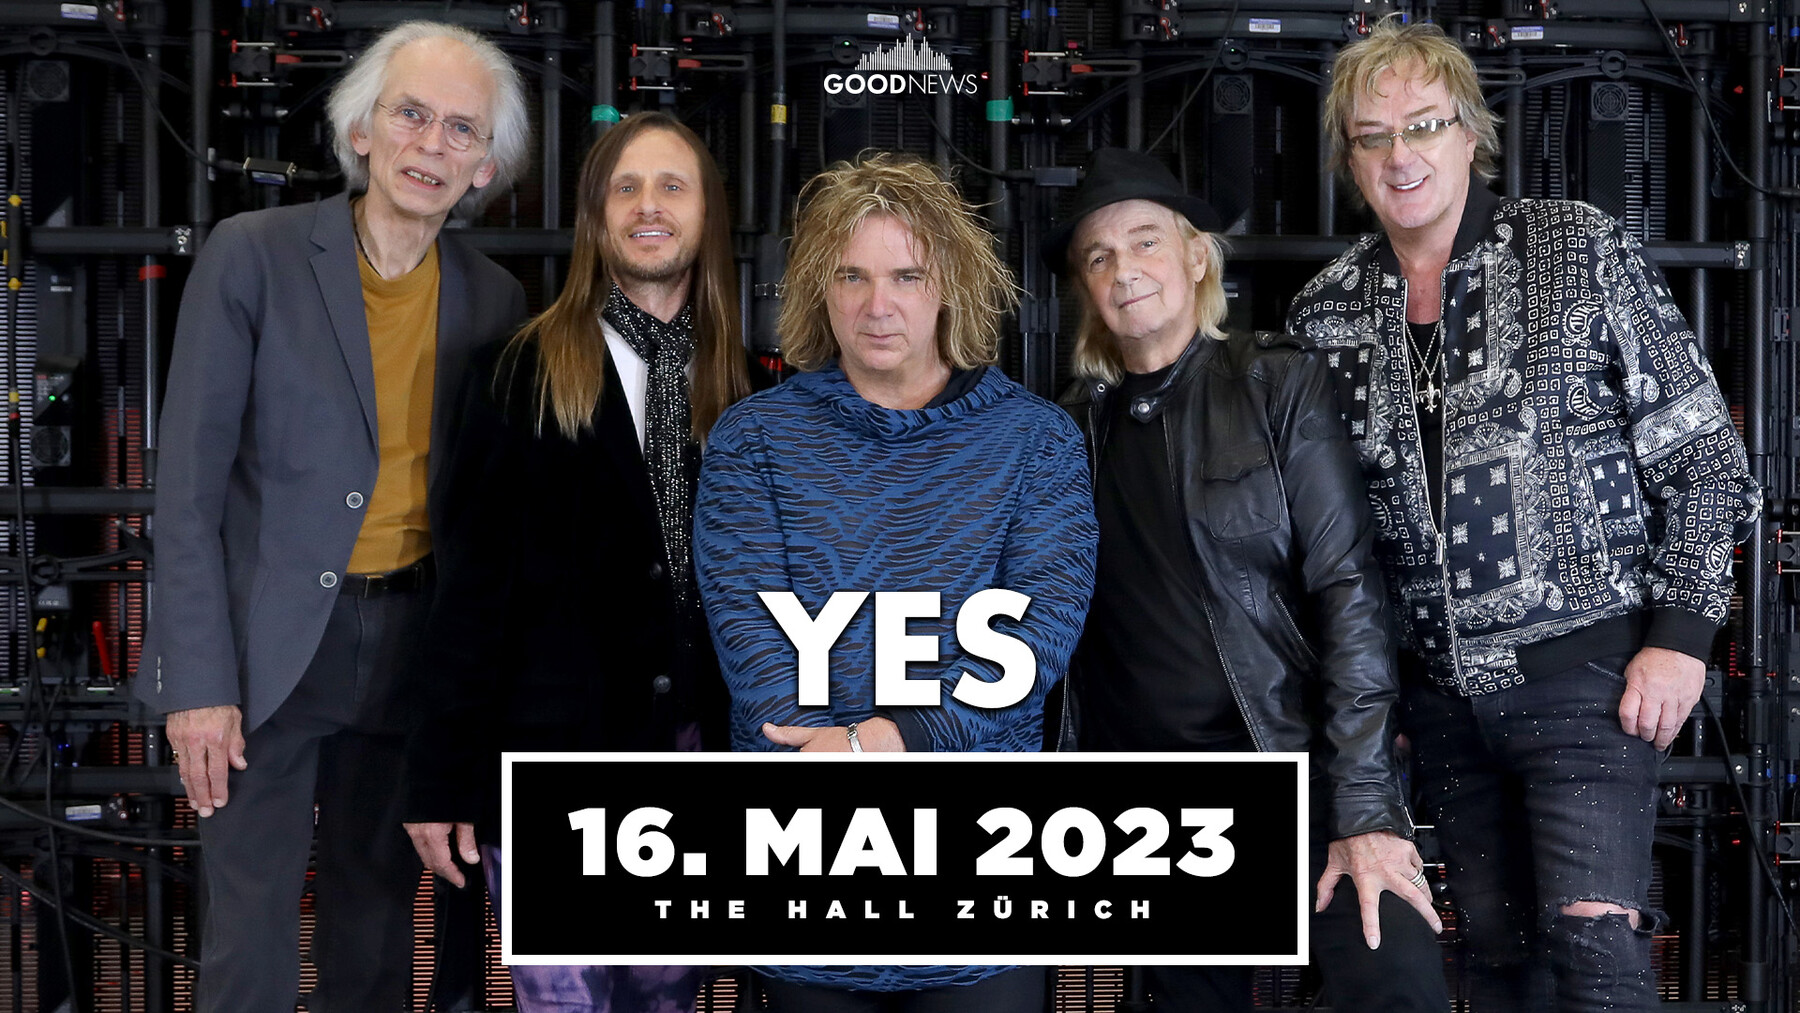 YES on 16.5.23 in THE HALL